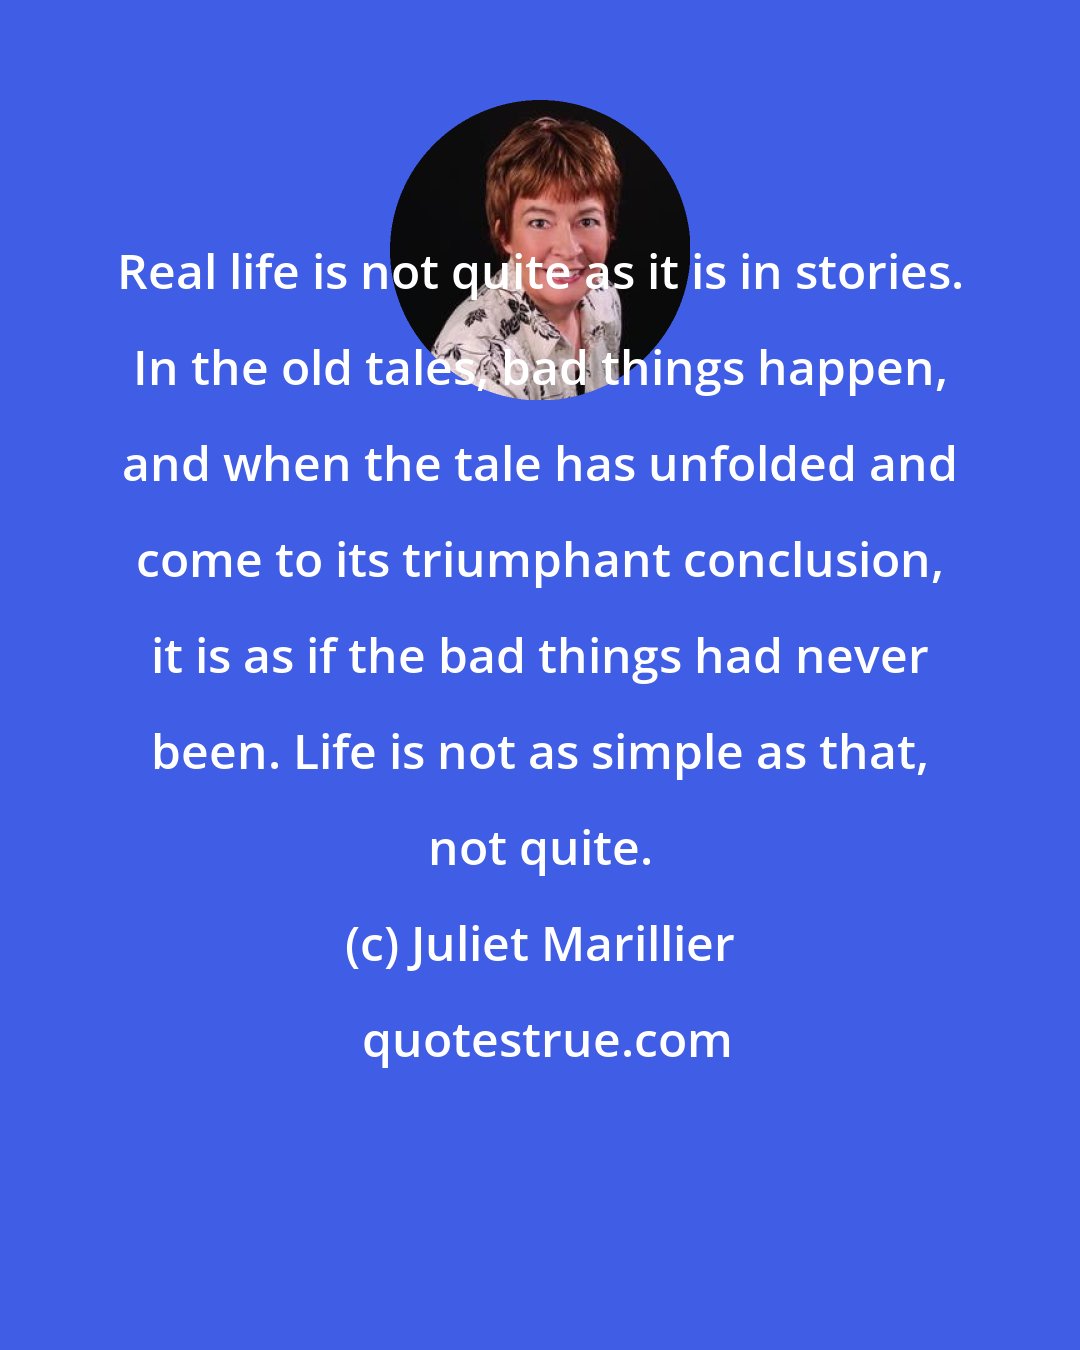 Juliet Marillier: Real life is not quite as it is in stories. In the old tales, bad things happen, and when the tale has unfolded and come to its triumphant conclusion, it is as if the bad things had never been. Life is not as simple as that, not quite.